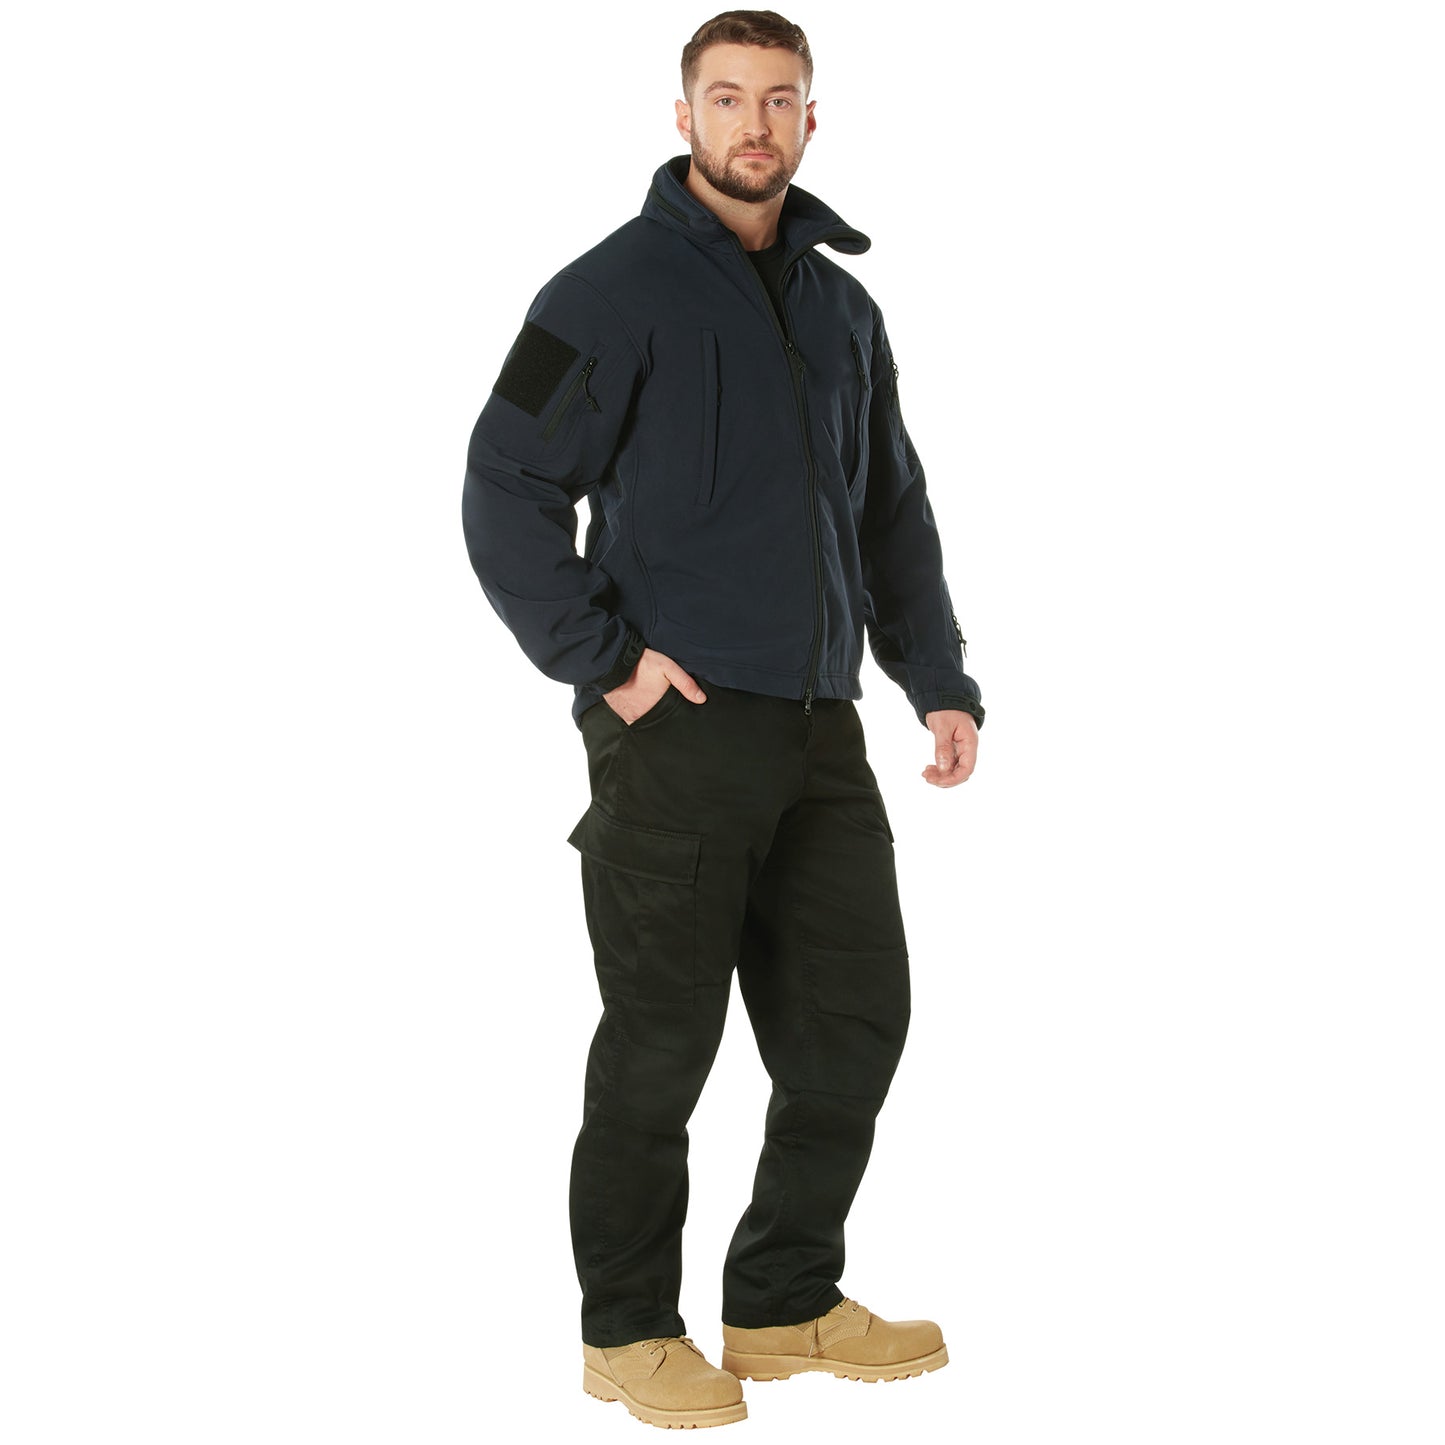 Rothco Concealed Carry Soft Shell Jacket